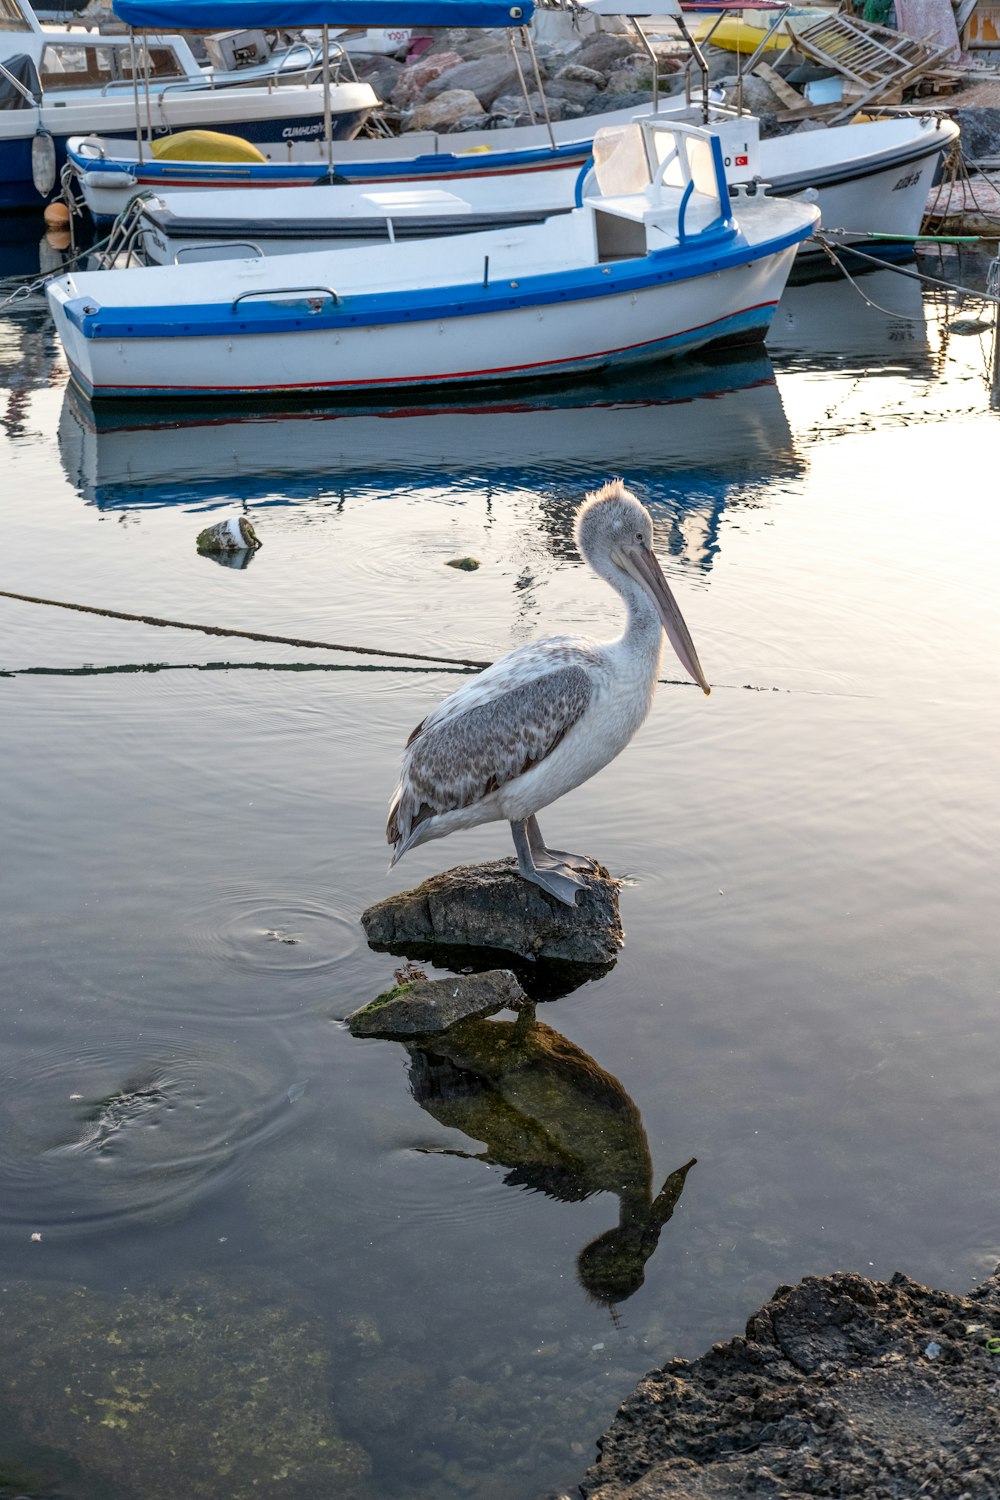 a bird is standing on a rock in the water